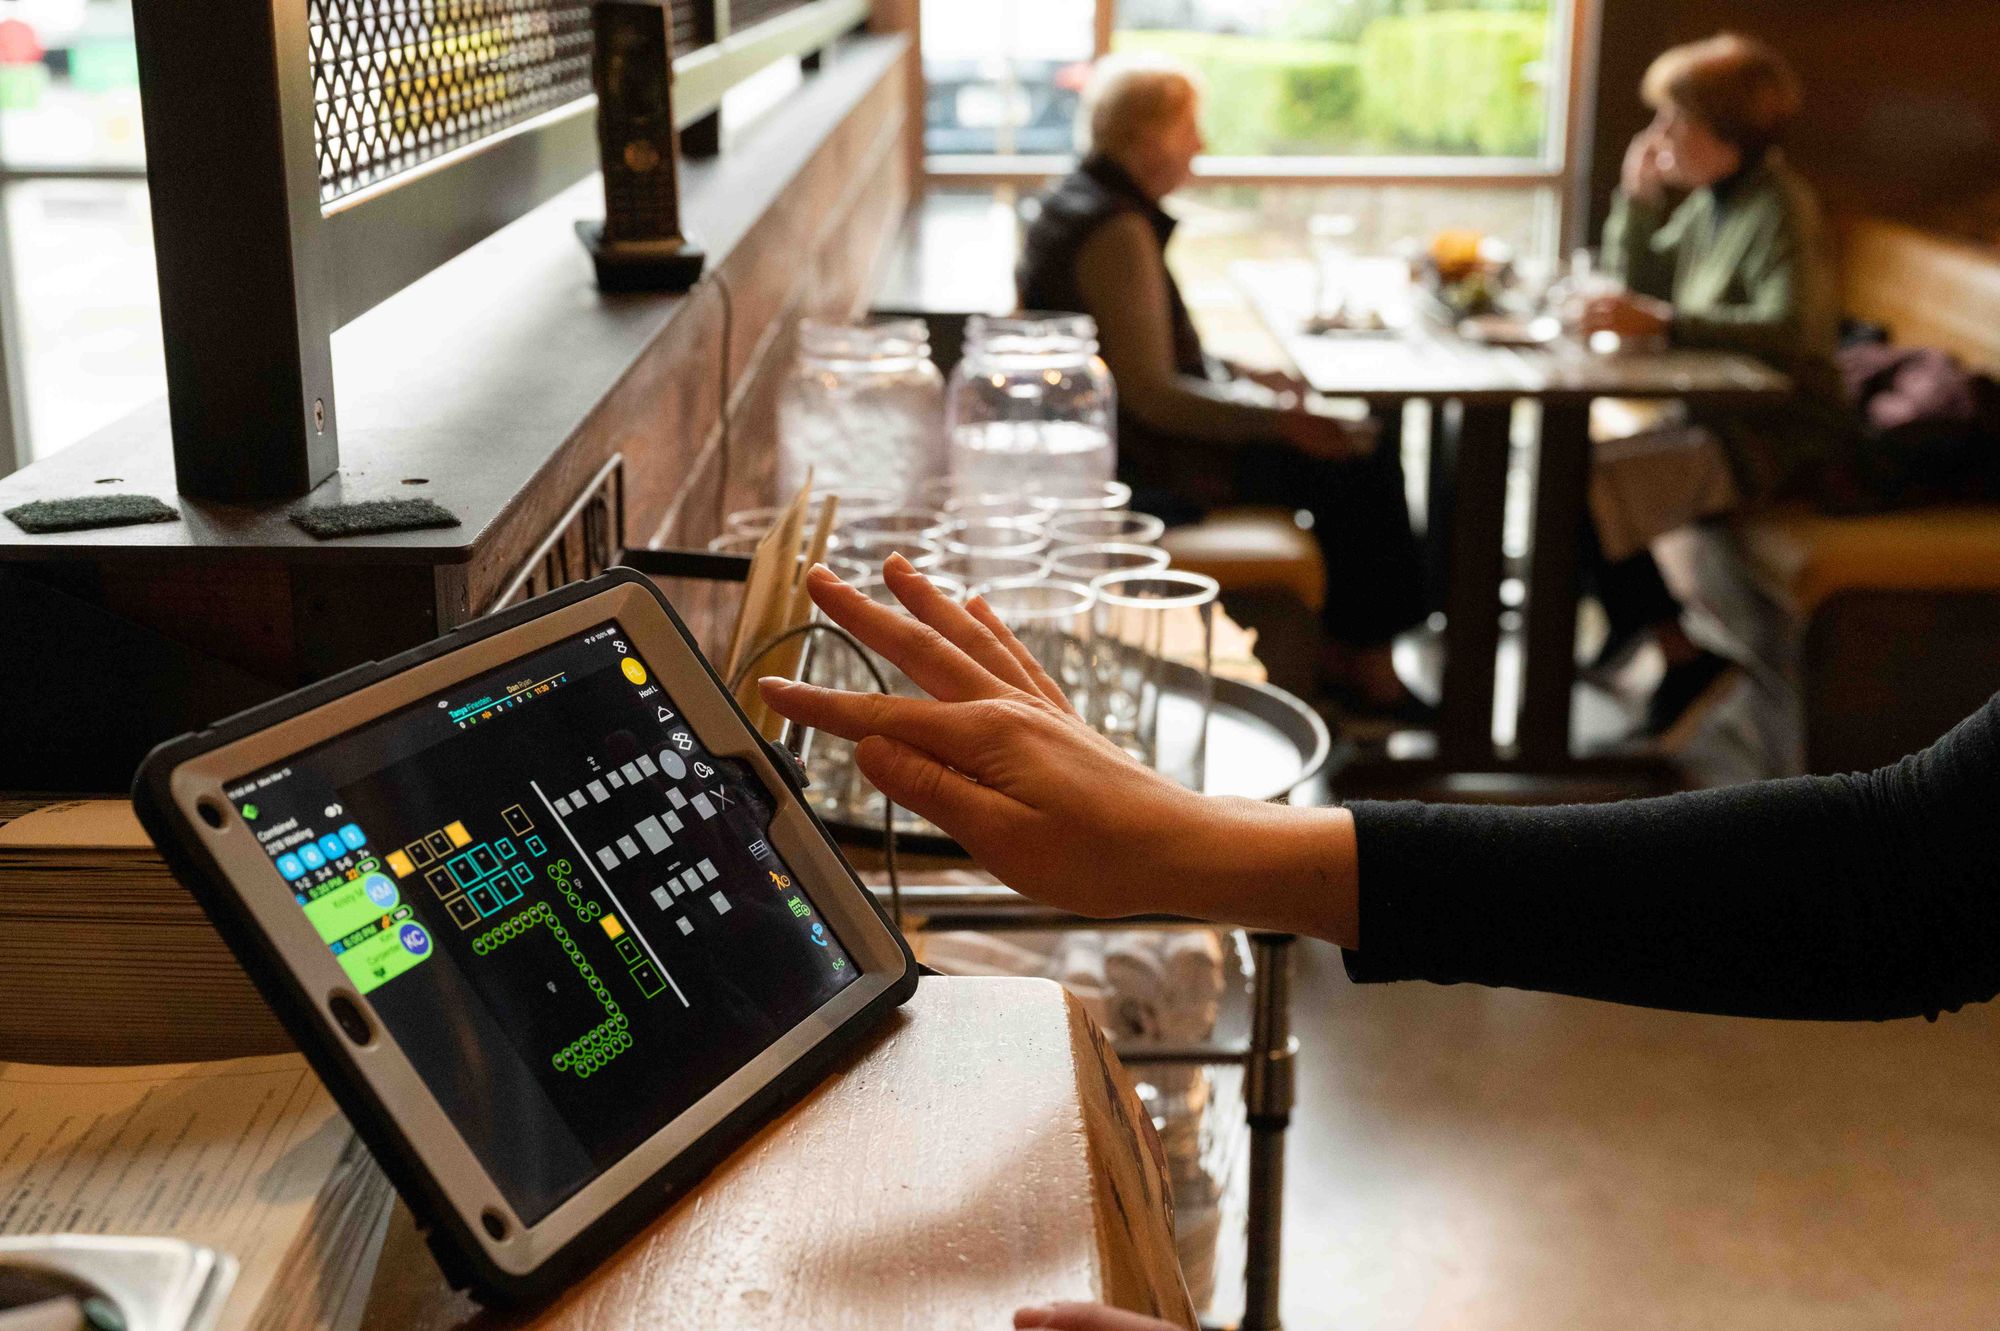 A host checks guests in using a digital waitlist tablet